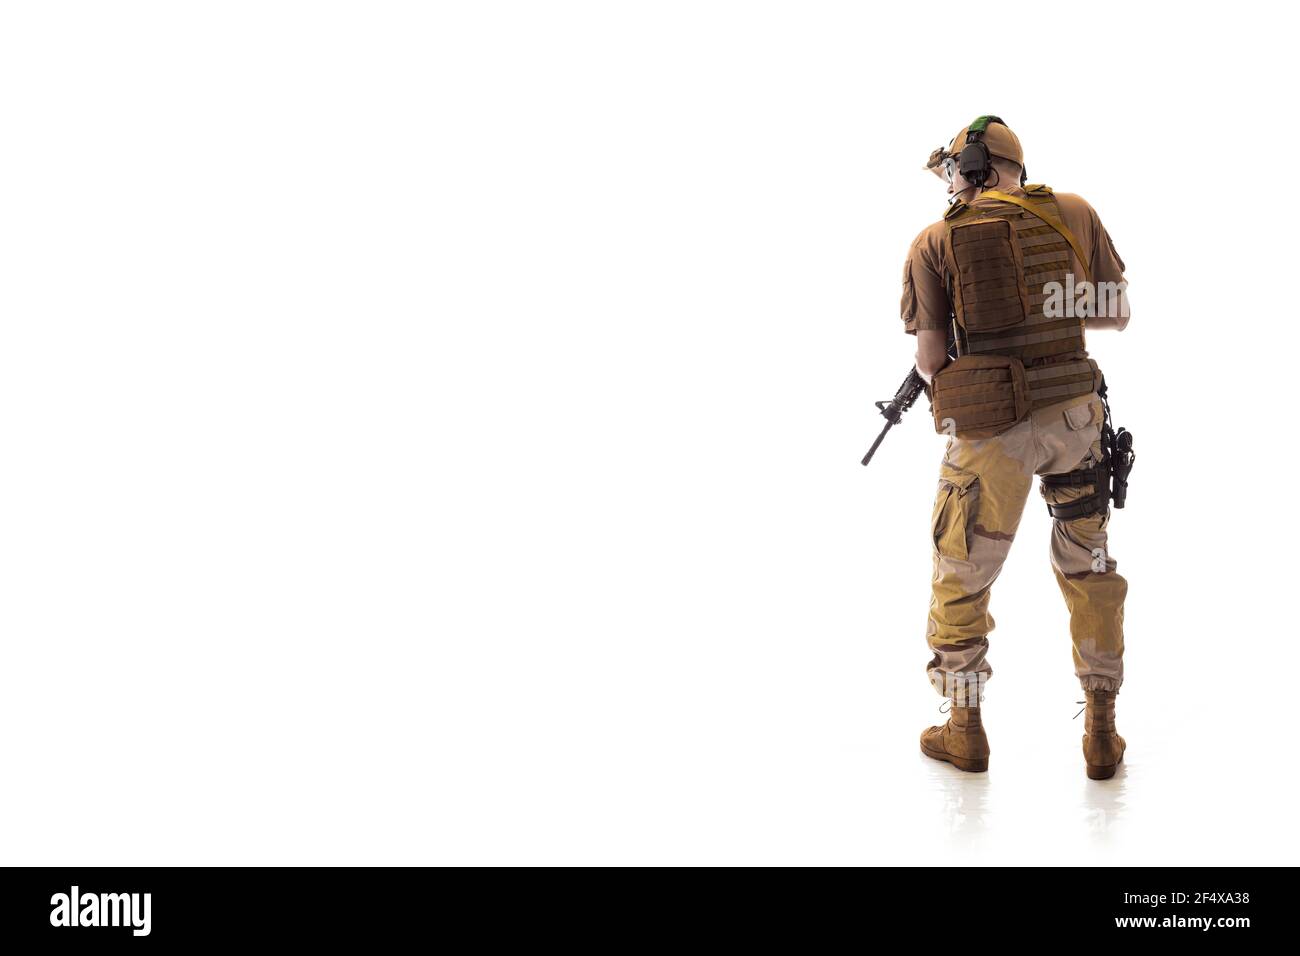 man military outfit a mercenary soldier in modern times on a white background in studio Stock Photo